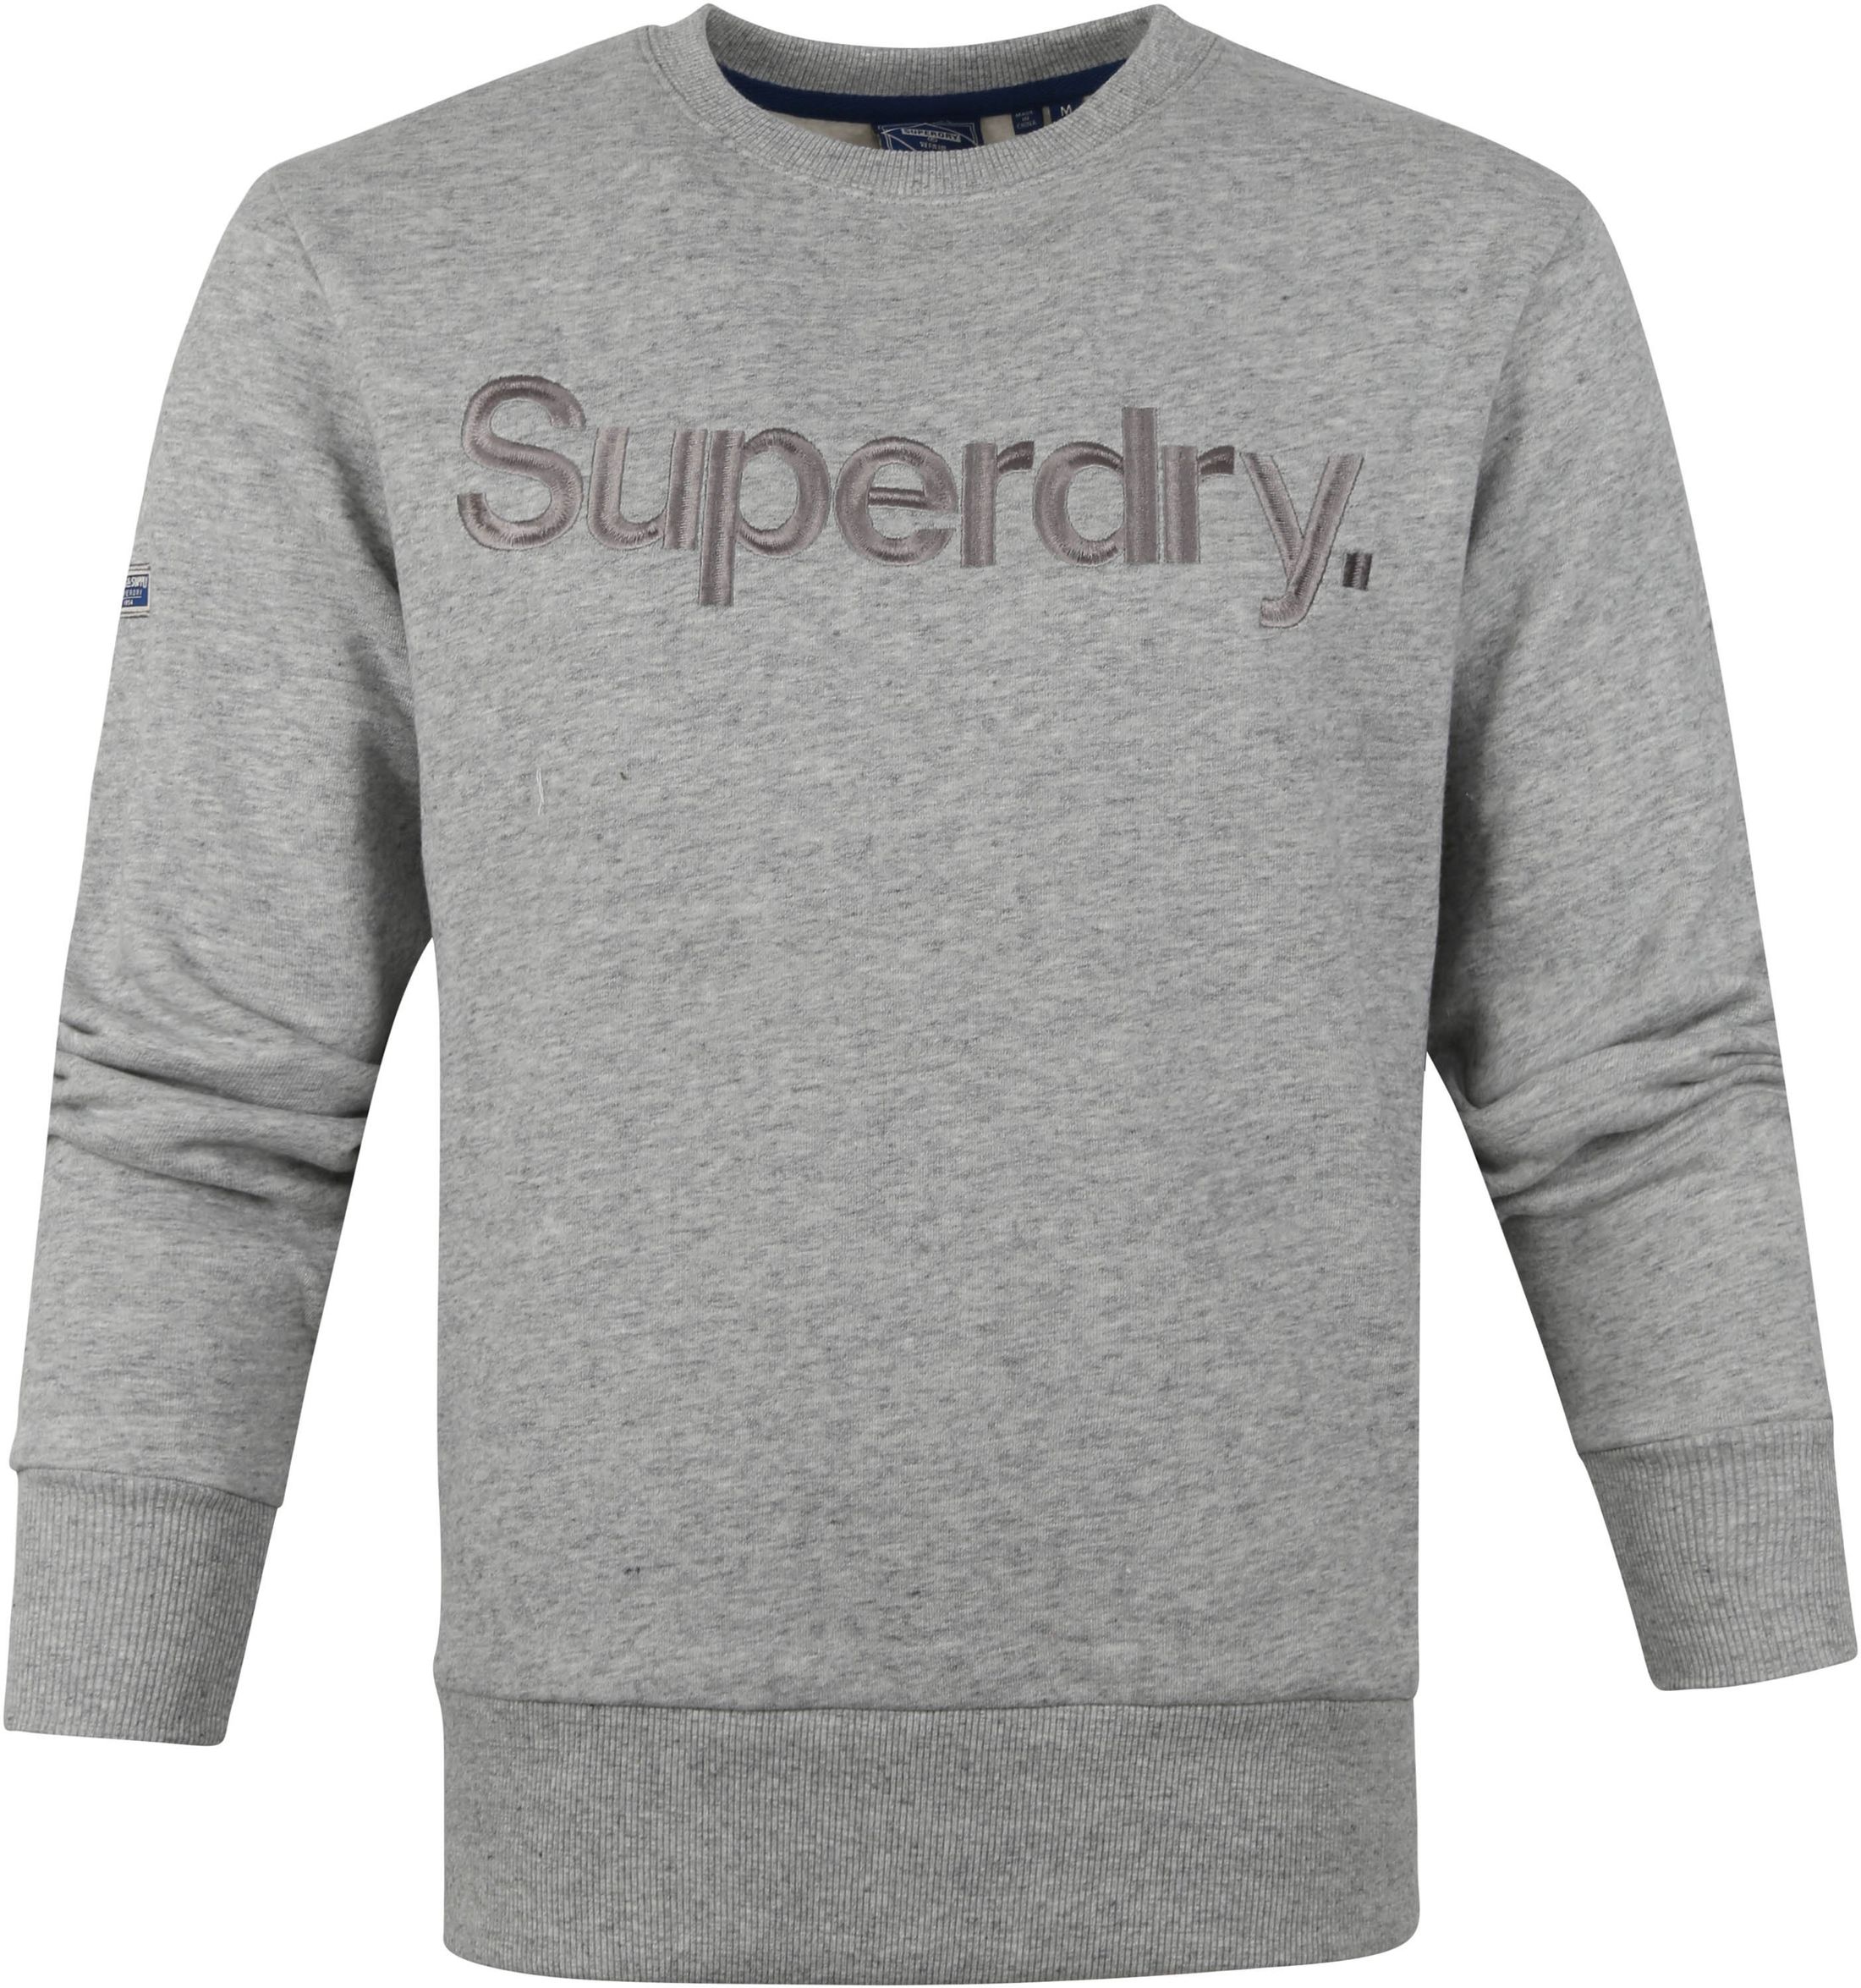 Superdry Sweater Source Grey size M